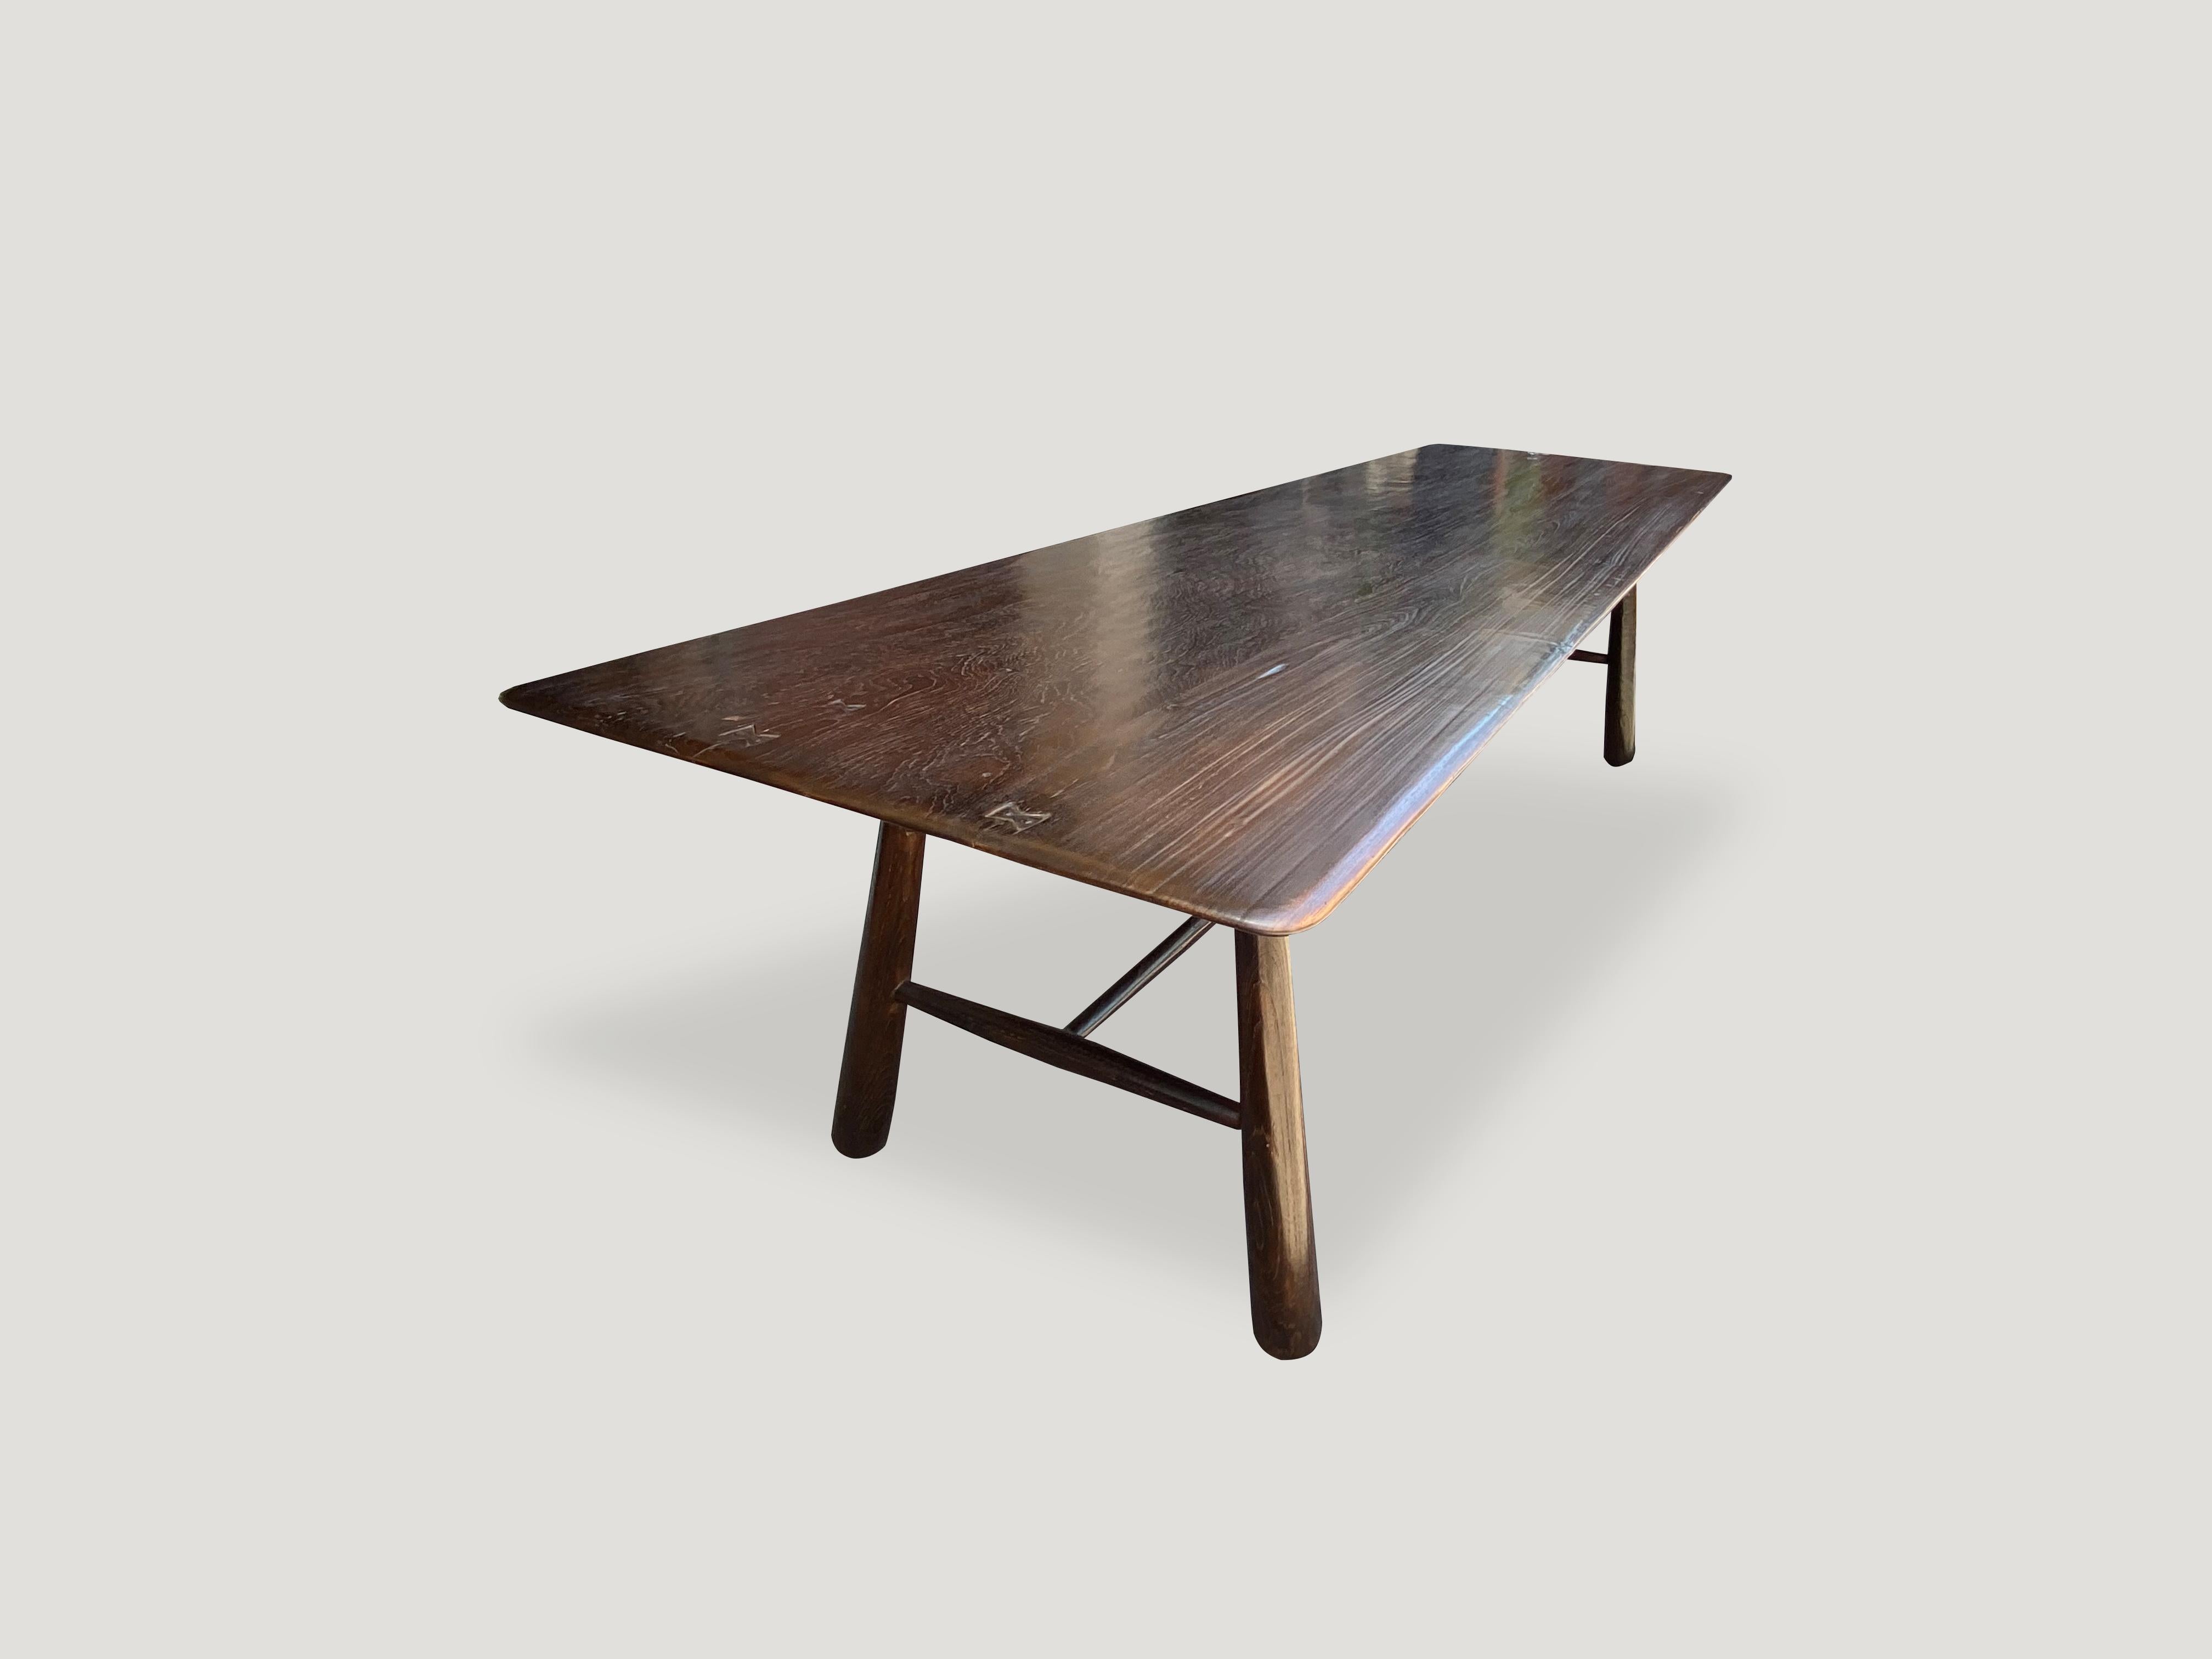 Introducing the mid century Couture Collection new to 2021. Furniture constructed by hand from start to finish. Two beautiful slabs of reclaimed teak wood, taken from my finest collection and turned into a stunning dining table or fabulous extra